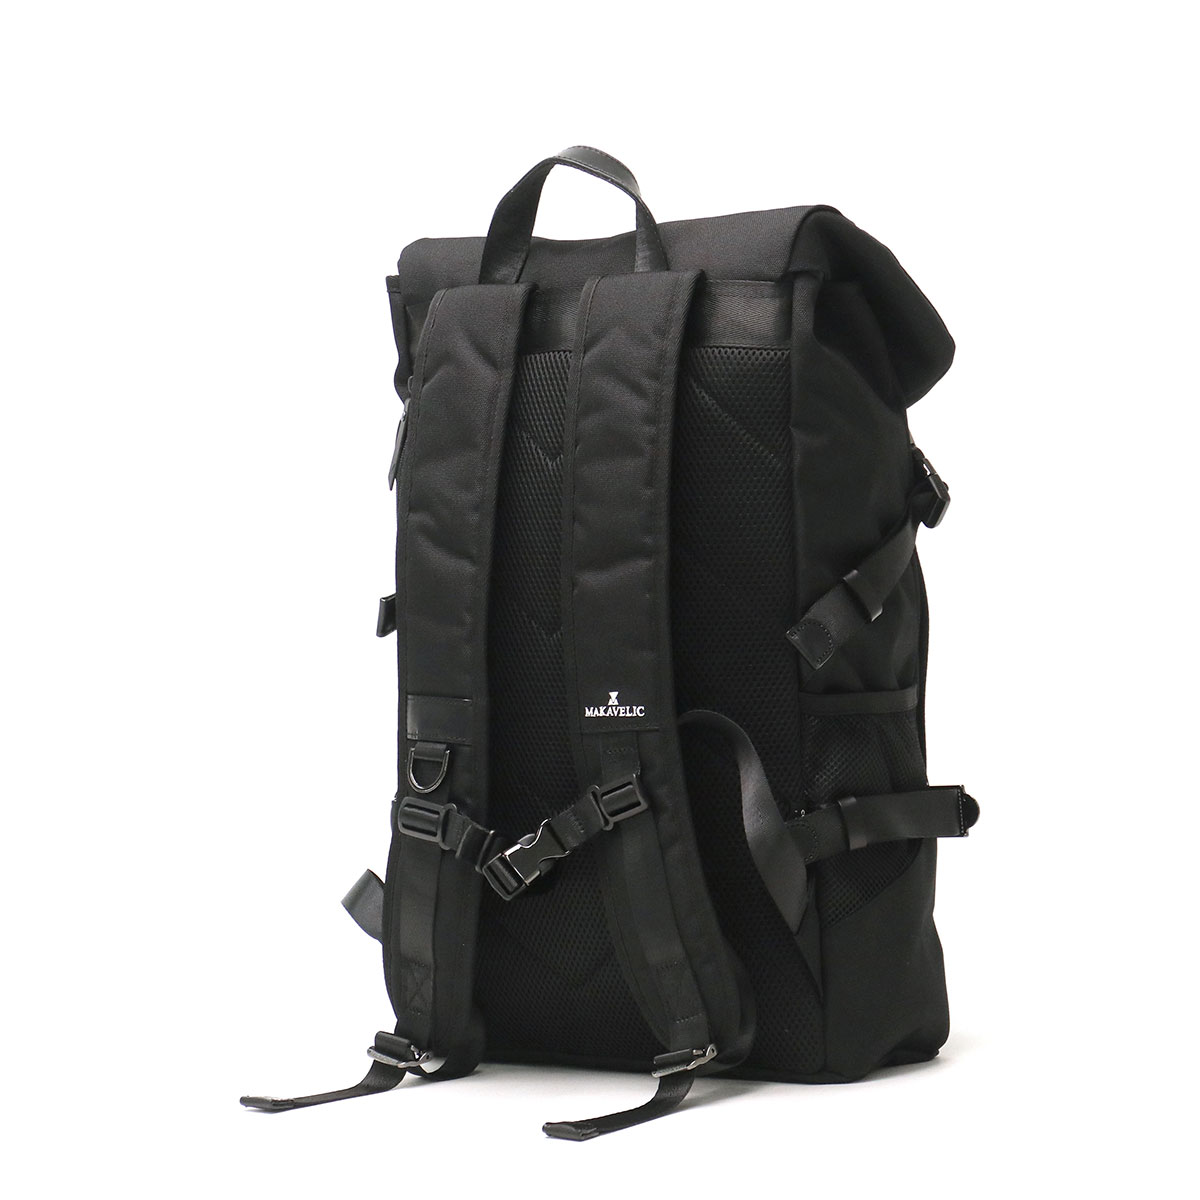 MAKAVELIC マキャベリック CHASE DOUBLE LINE 2 BACKPACK 3120-10126